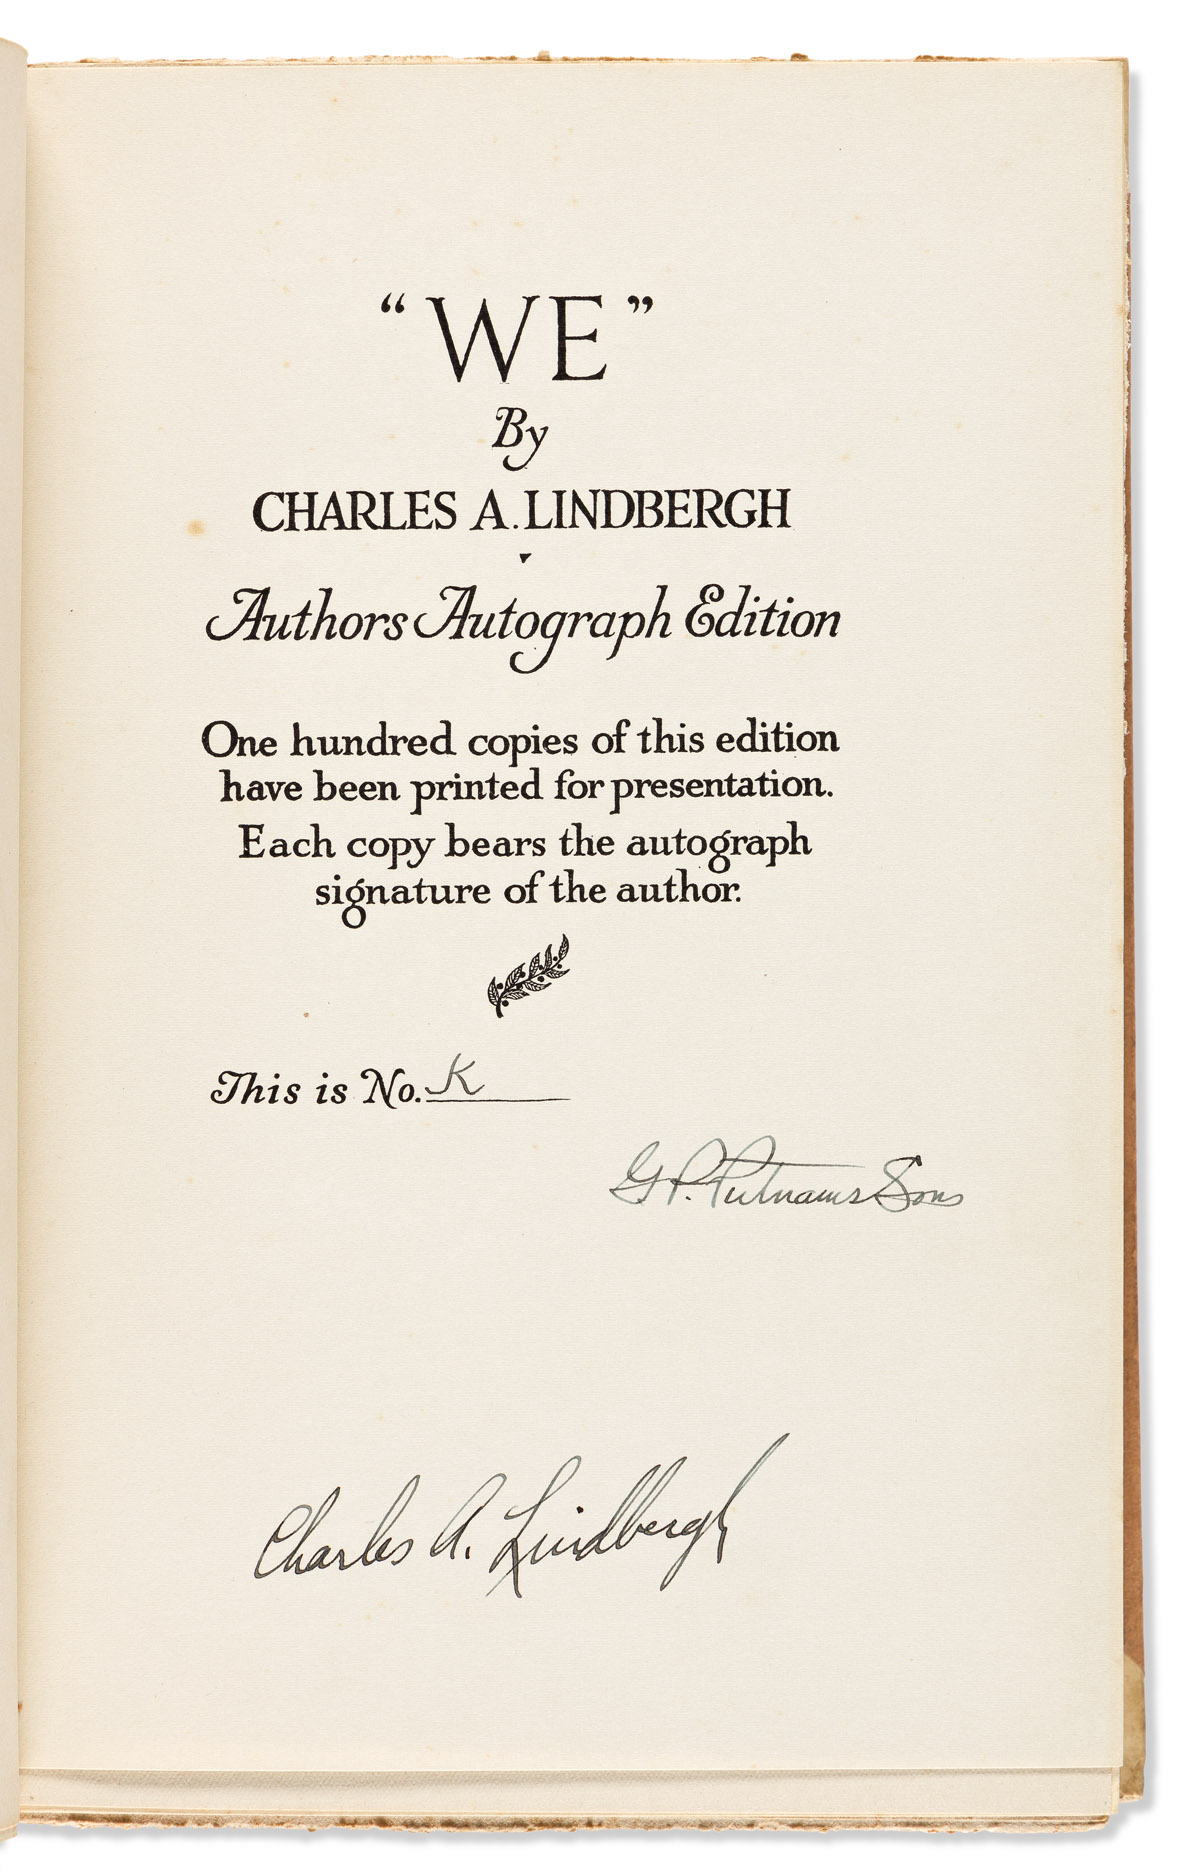 LINDBERGH, CHARLES A. We. Signed on the limitation page.